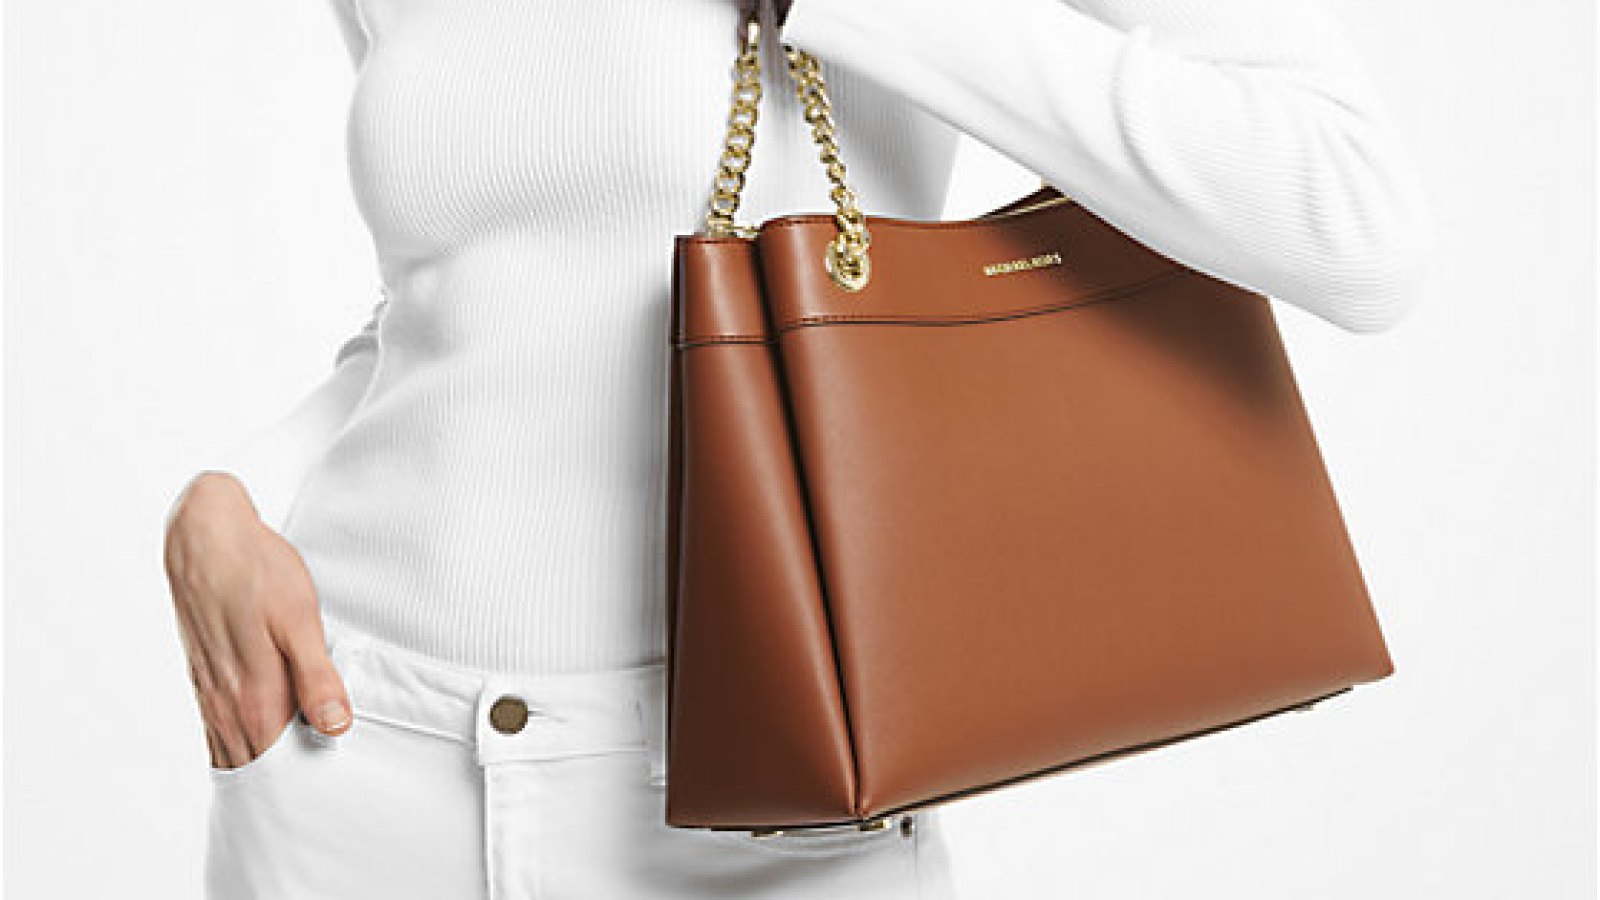 Take an Extra 25% Off Sale Styles at Michael Kors!